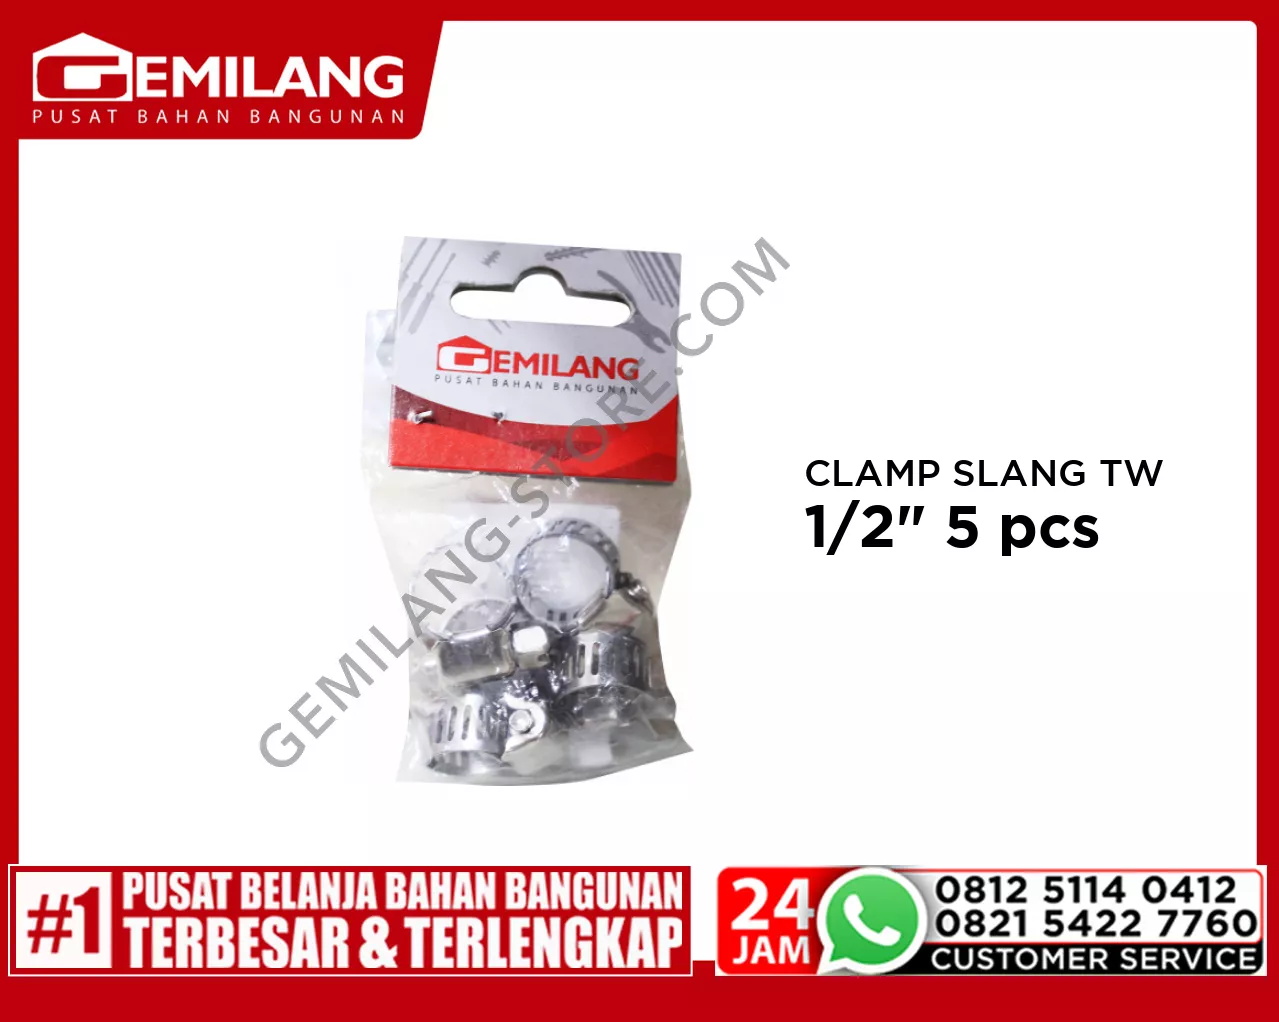 WIPRO CLAMP SLANG TW 1/2inch 5pc